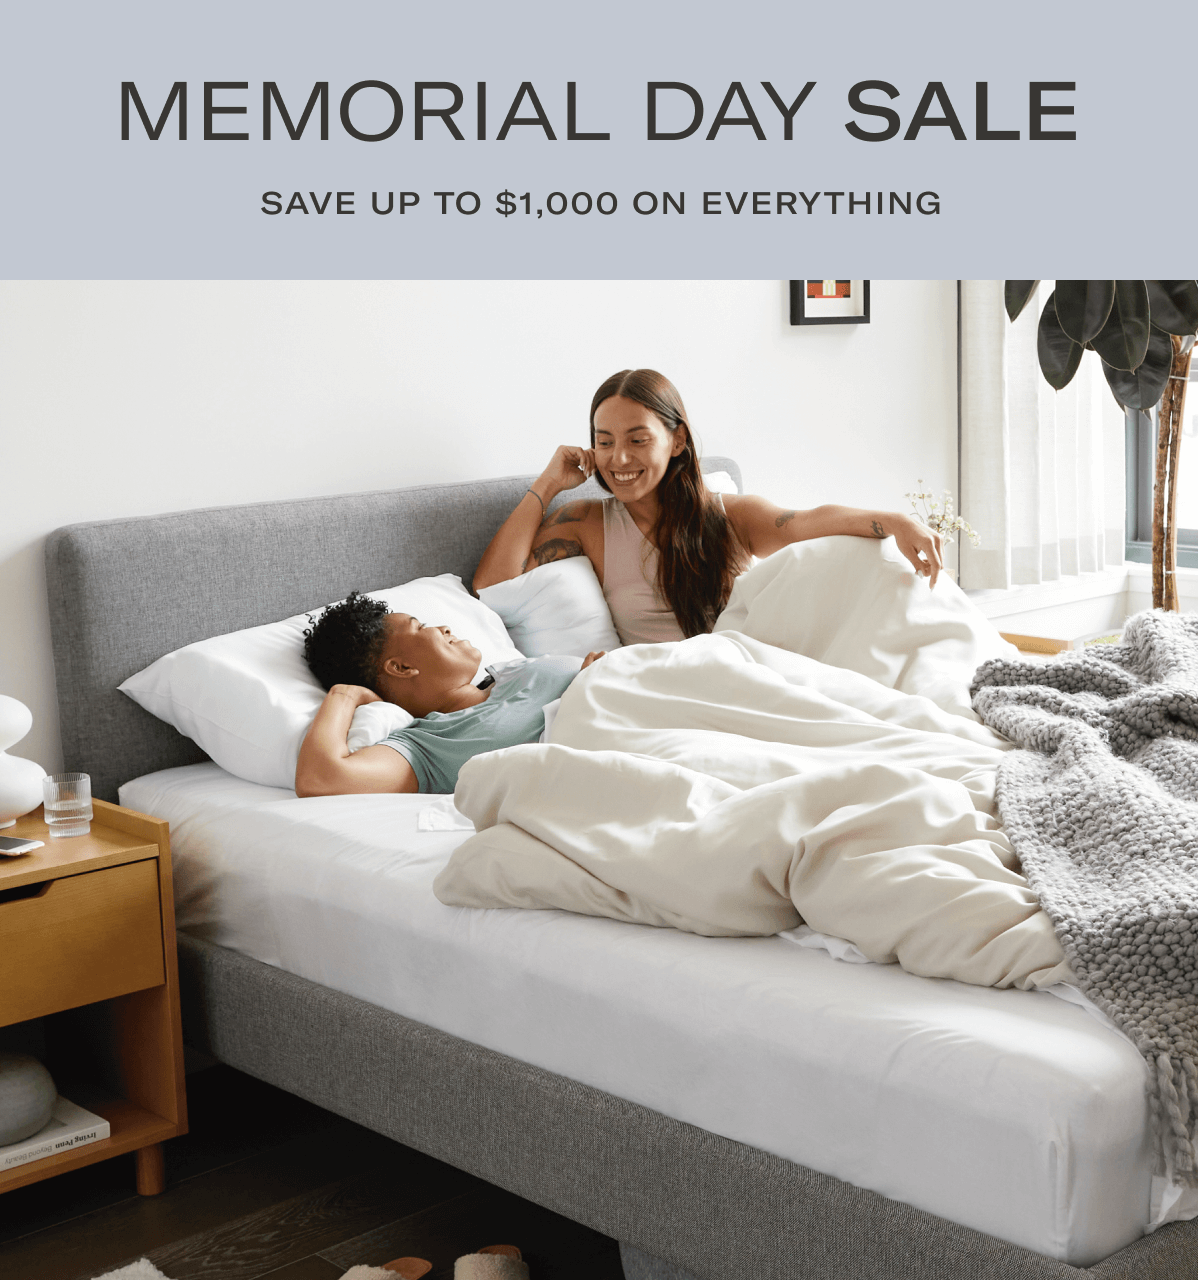 Memorial Day Sale | Save up to $1,000 on everything